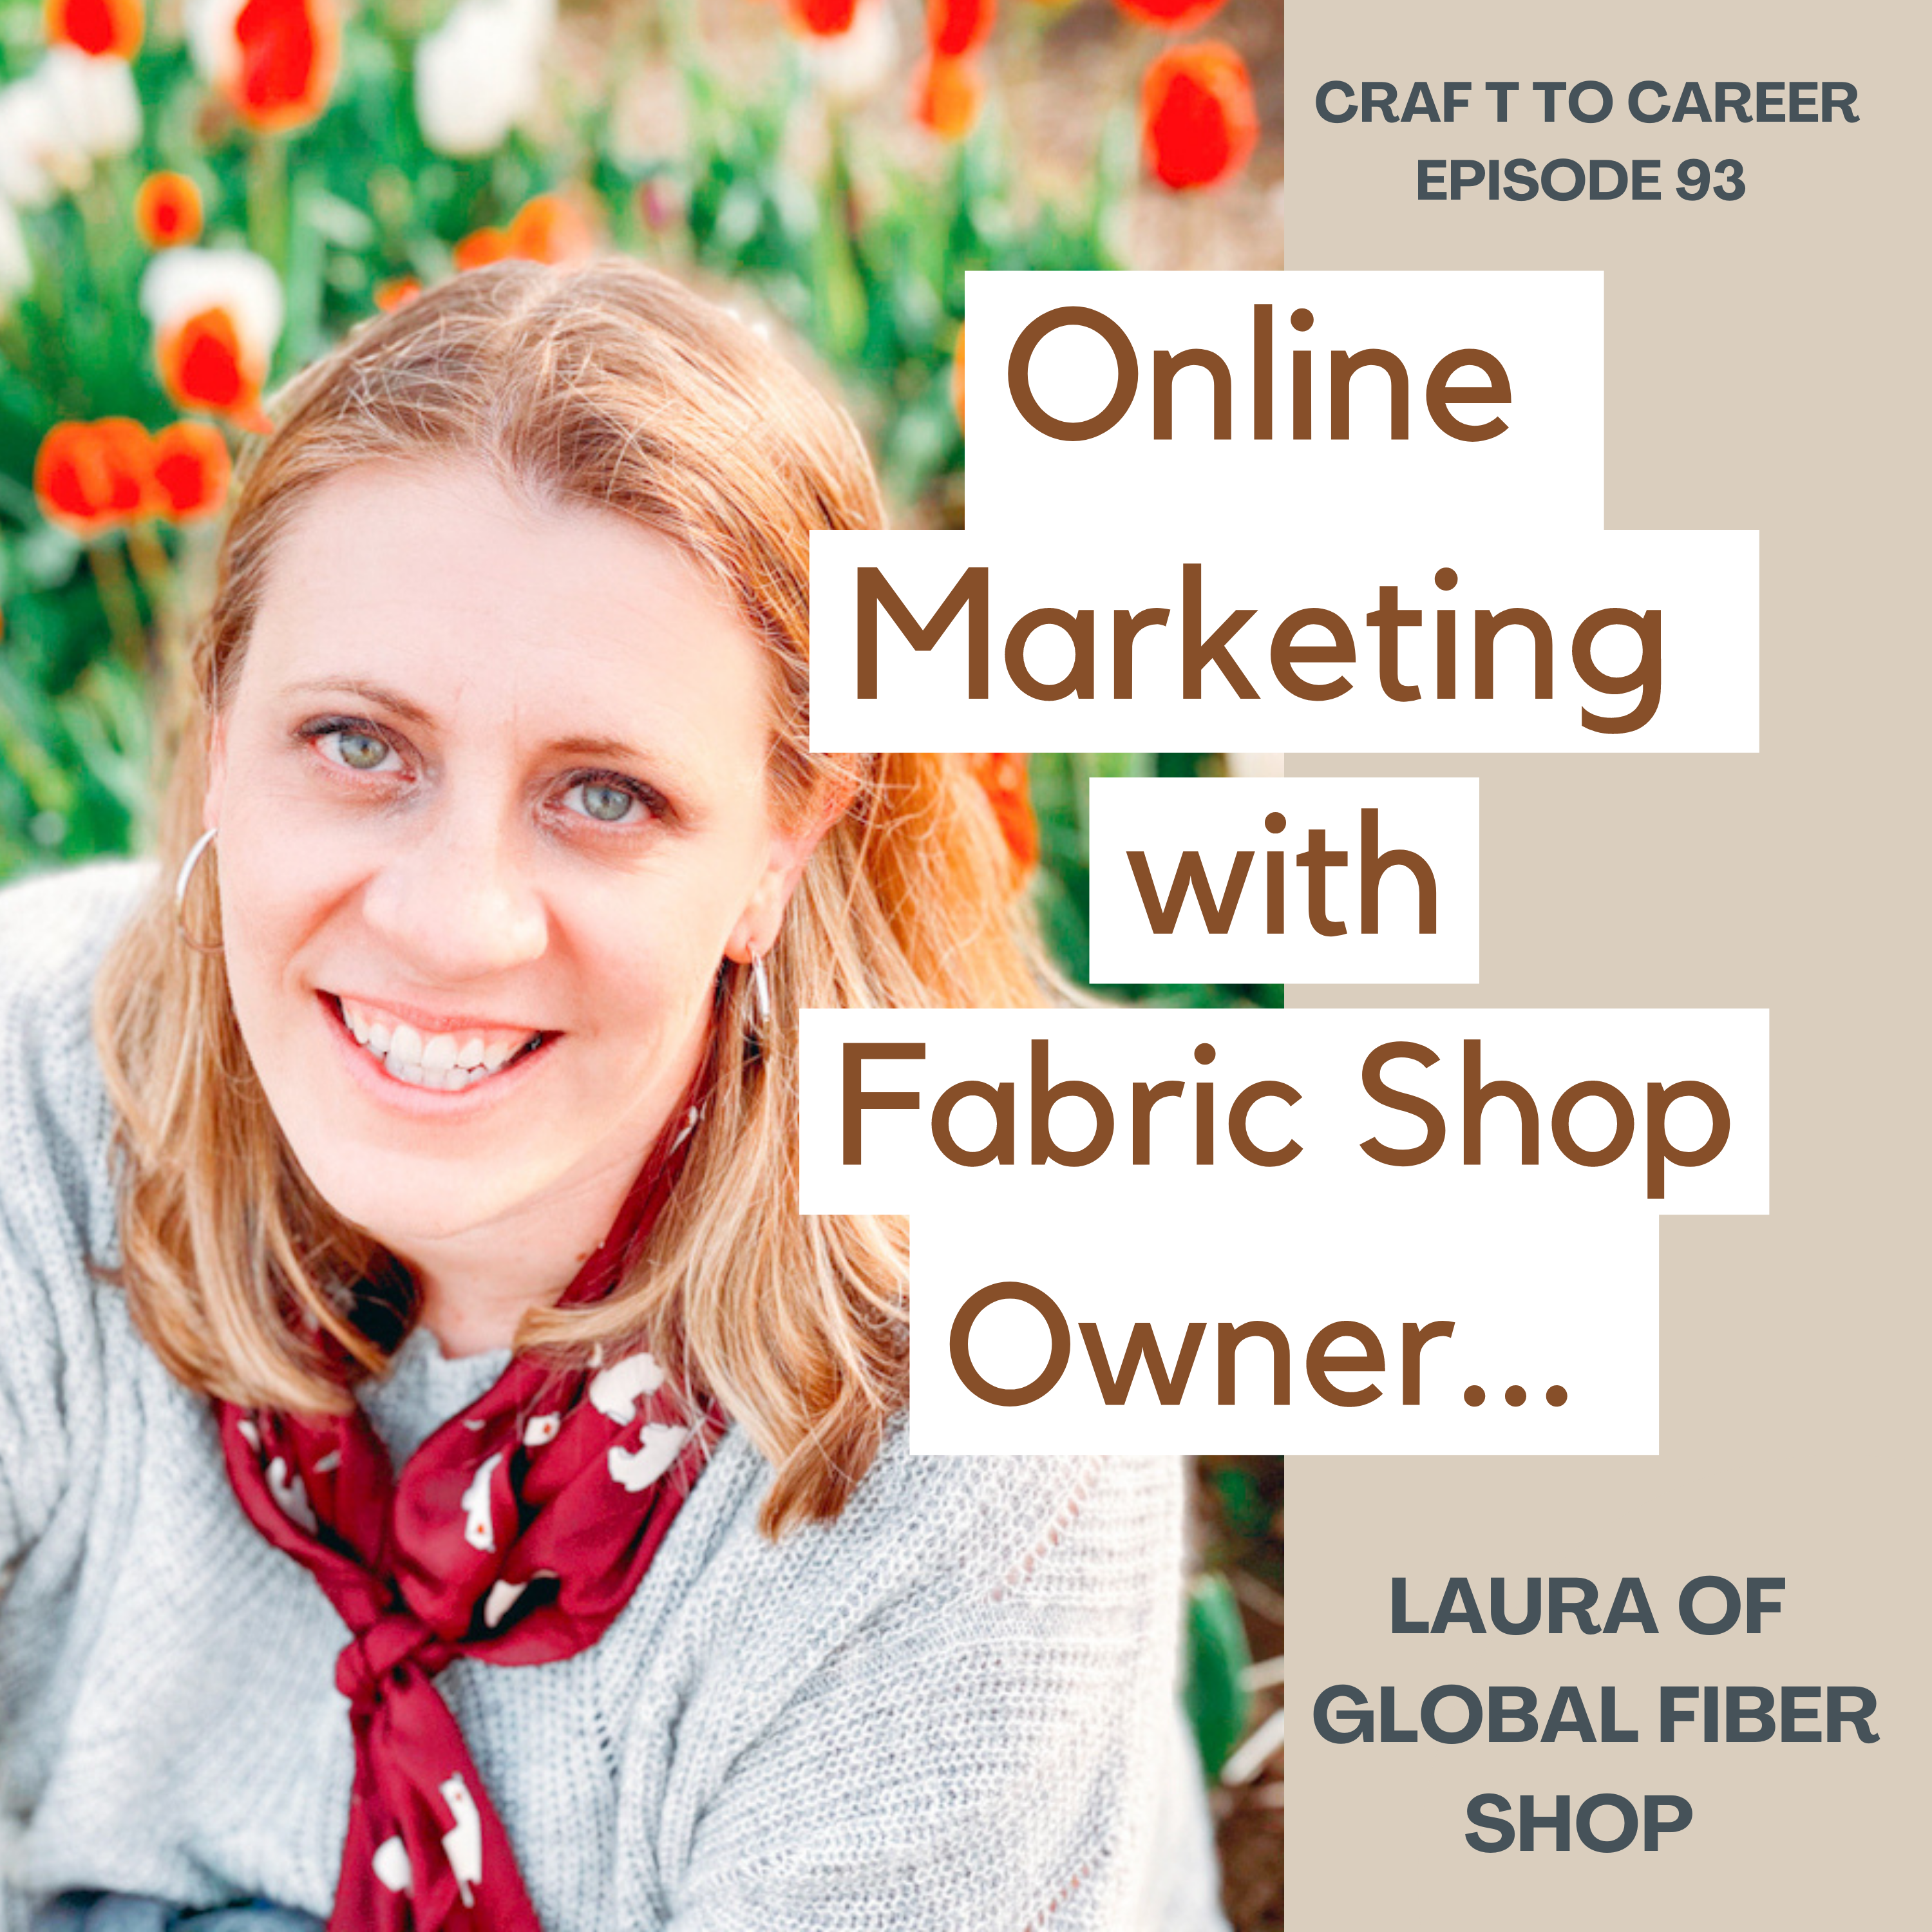 Online Marketing with Fabric Shop Owner Laura of Global Fiber Shop.